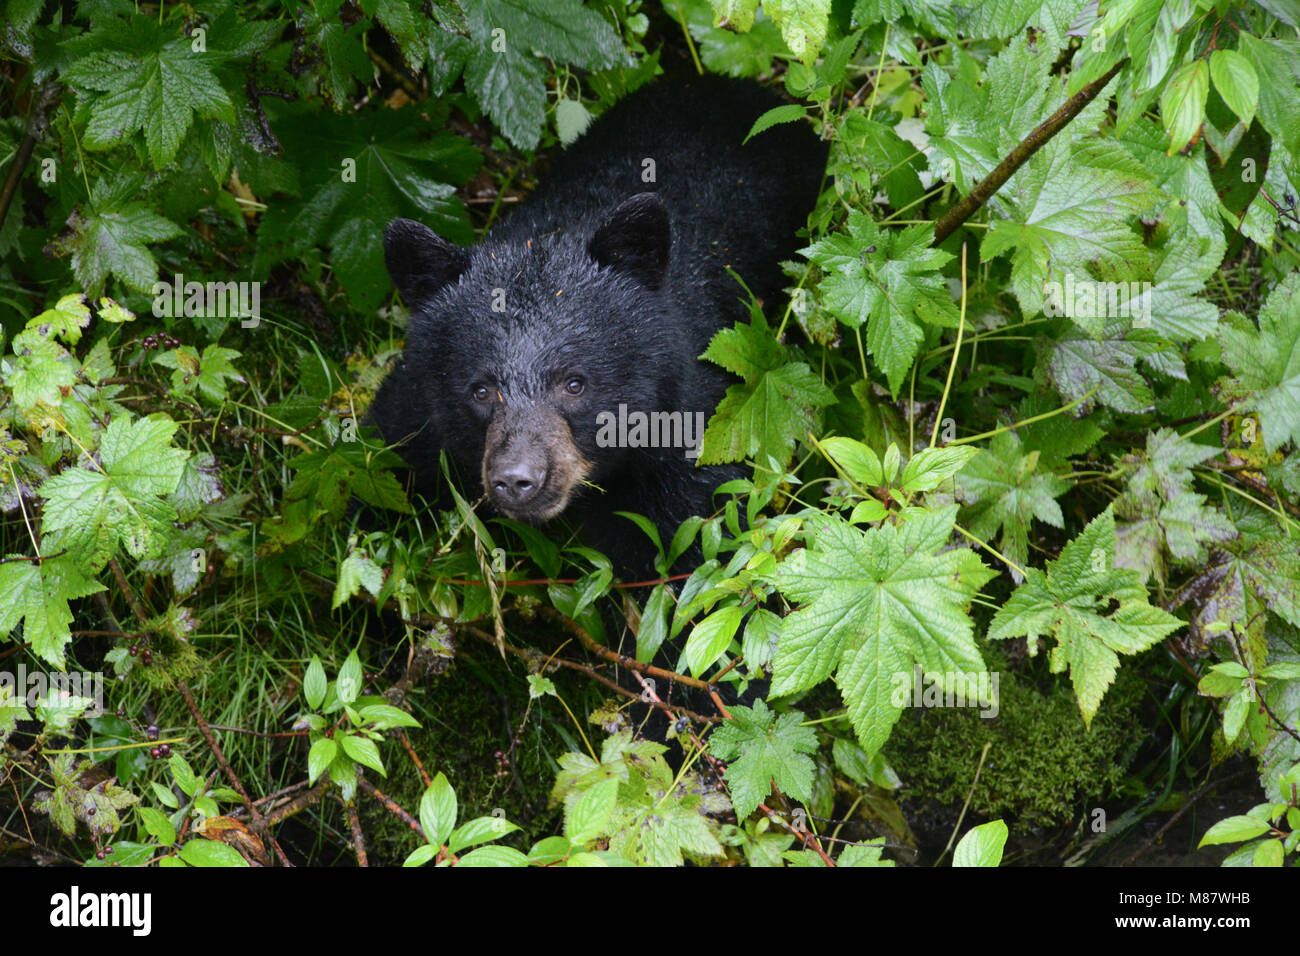 A young black bear below the viewing platform at the Fish Creek Wildlife Observation Site, in the Tongass National Forest, near Hyder, Alaska, USA. Stock Photo